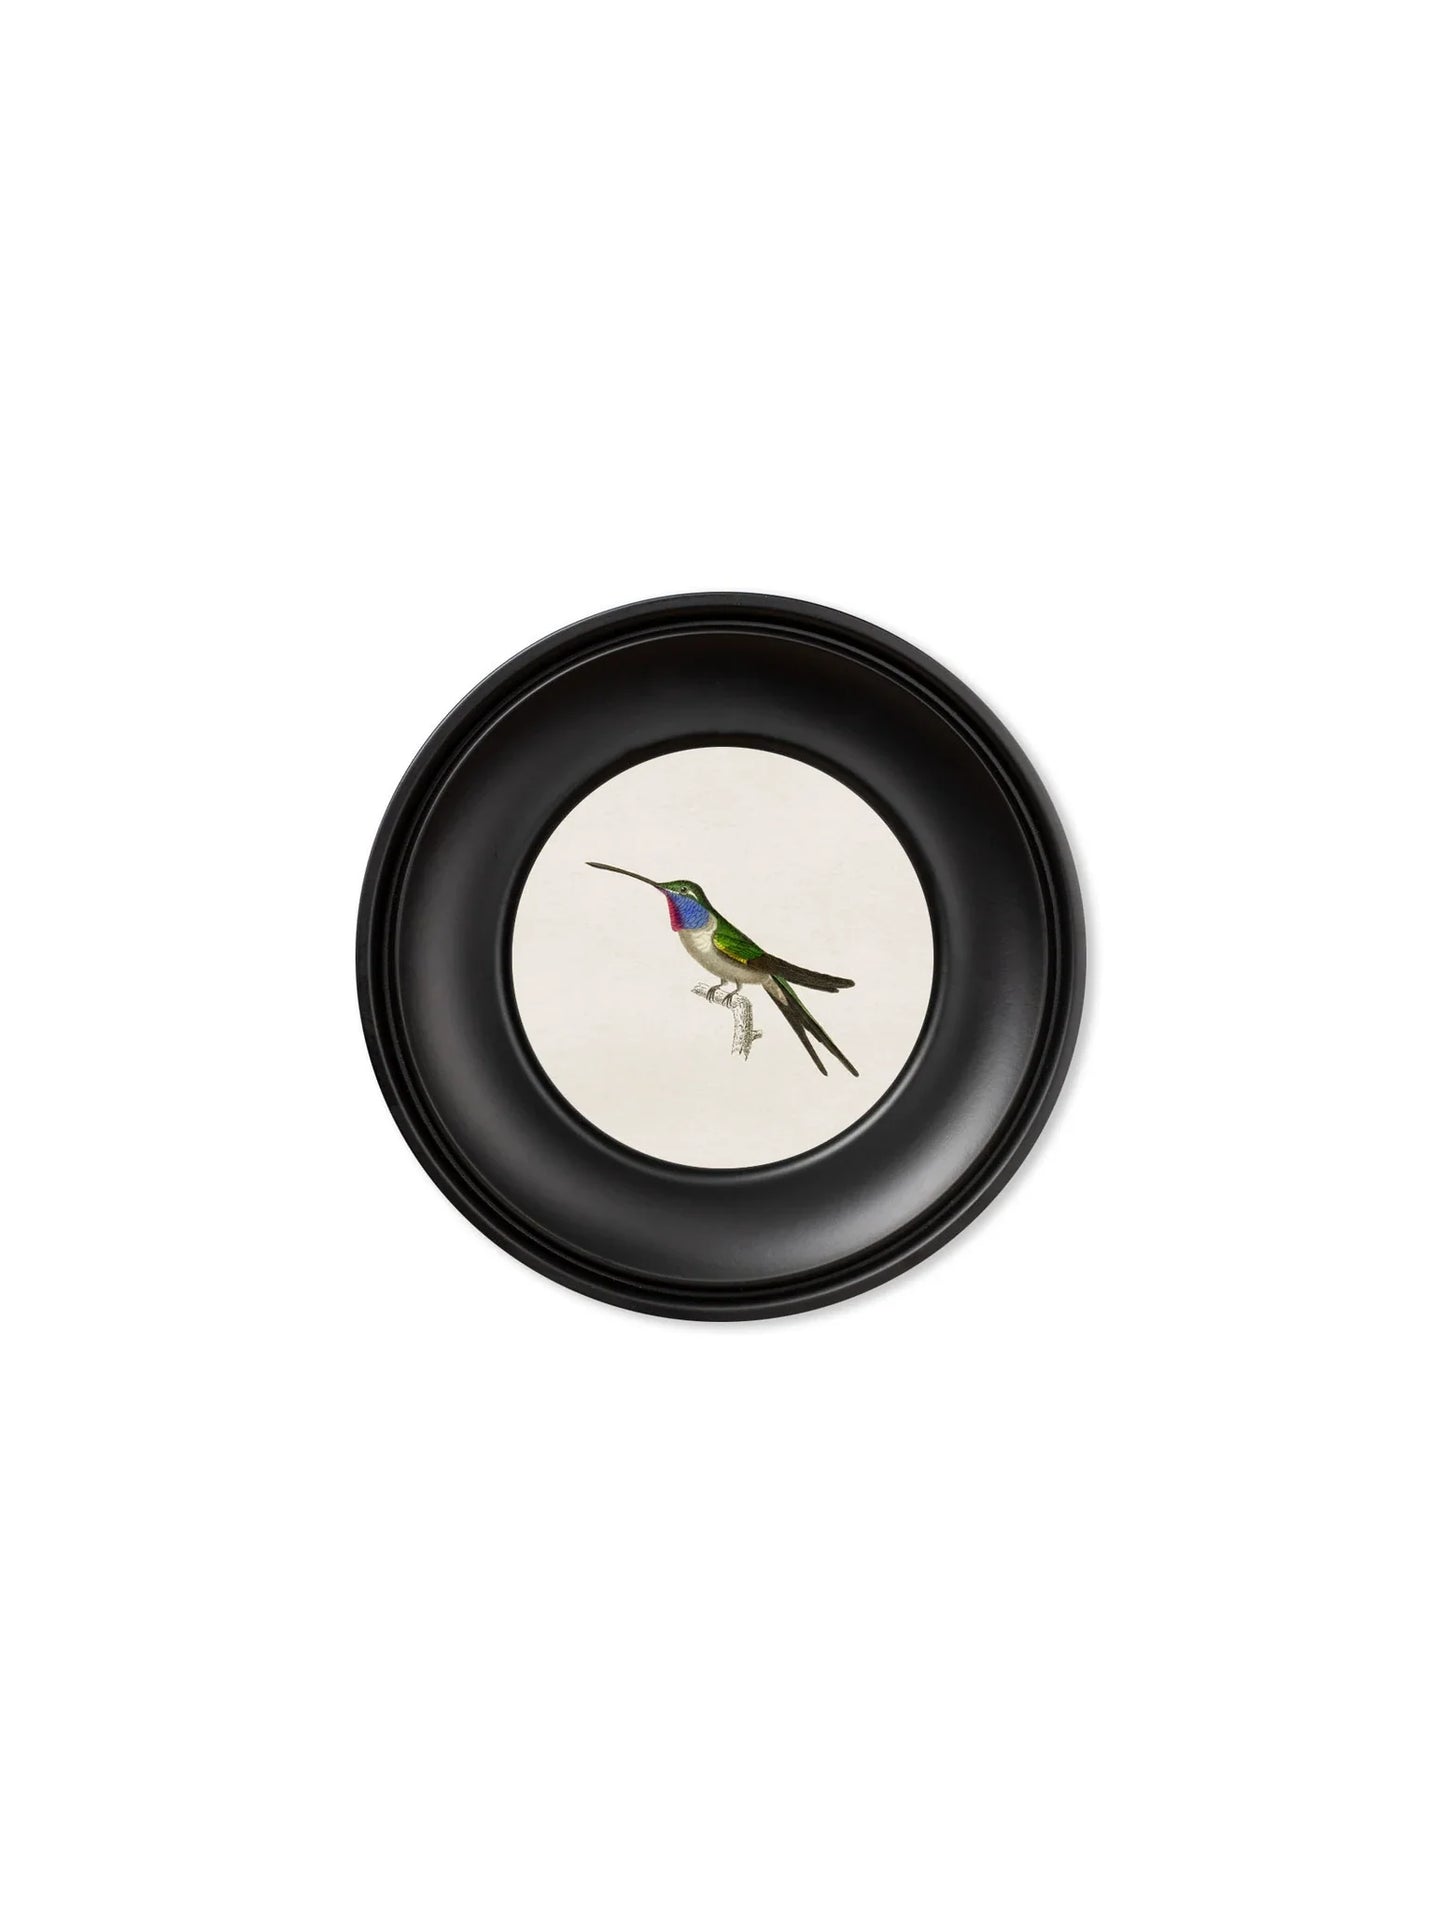 C.1835 Collection of Hummingbirds In Mini Round Frames for sale - Woodcock and Cavendish